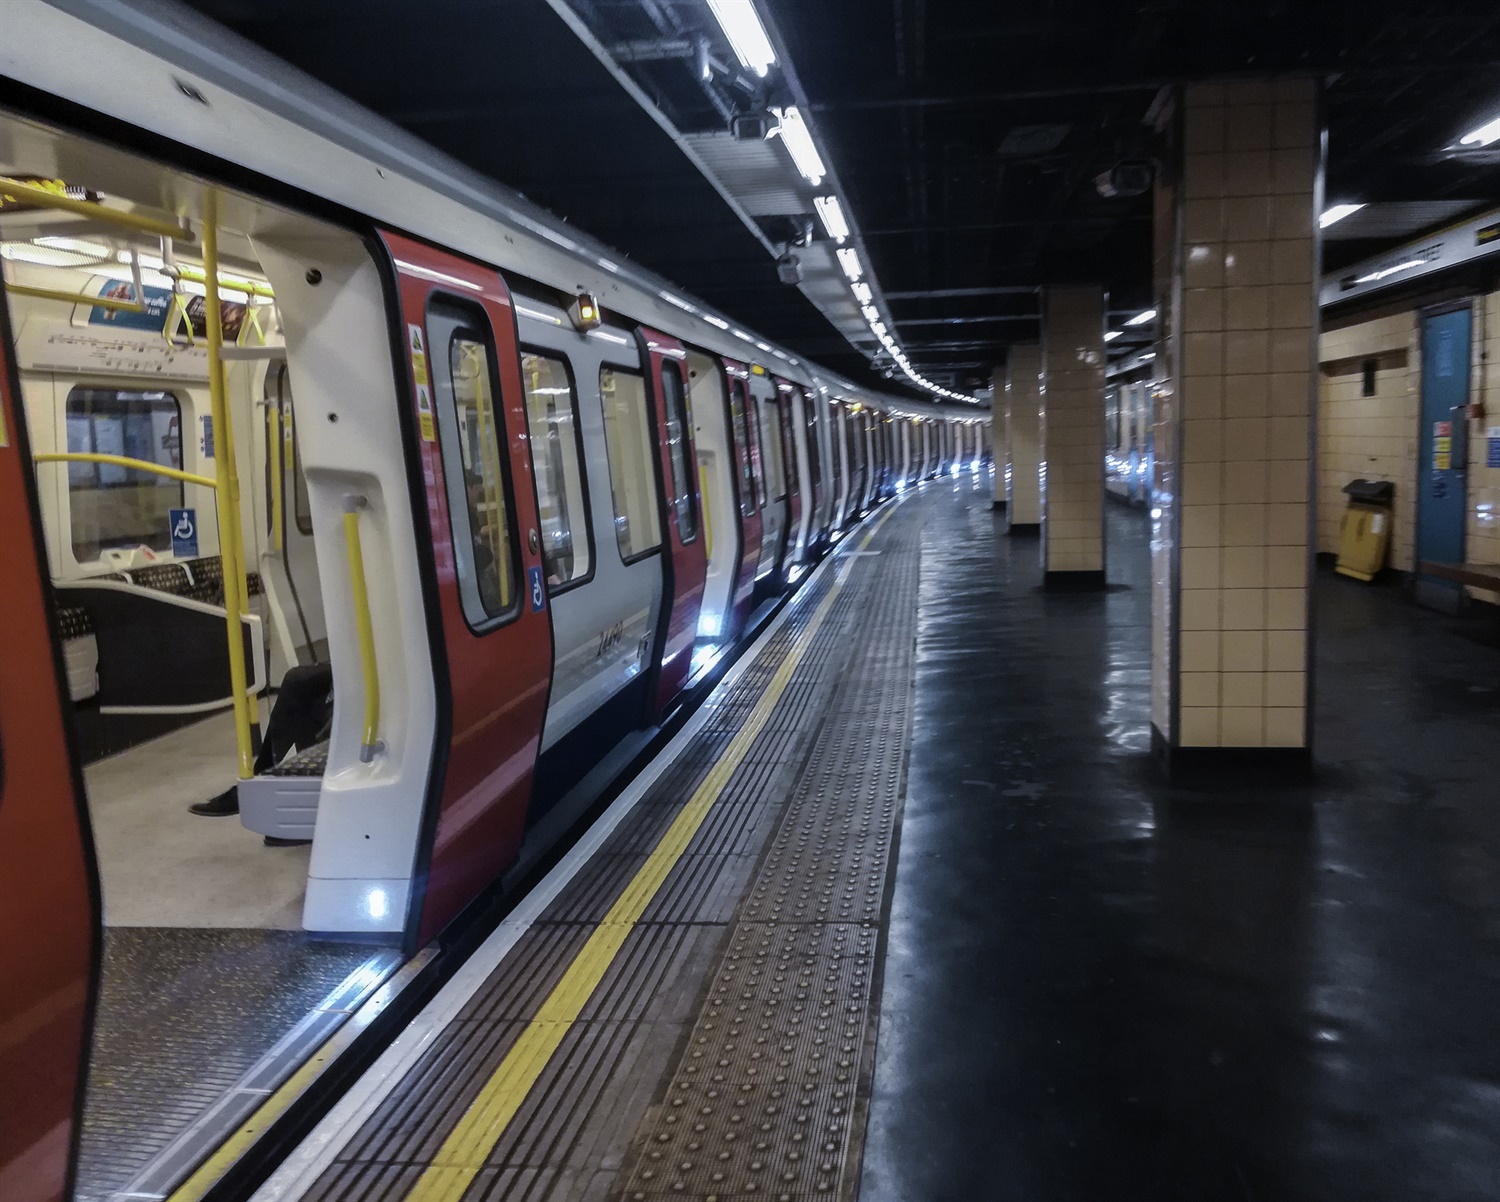 Transport for London explains the importance of cyber security